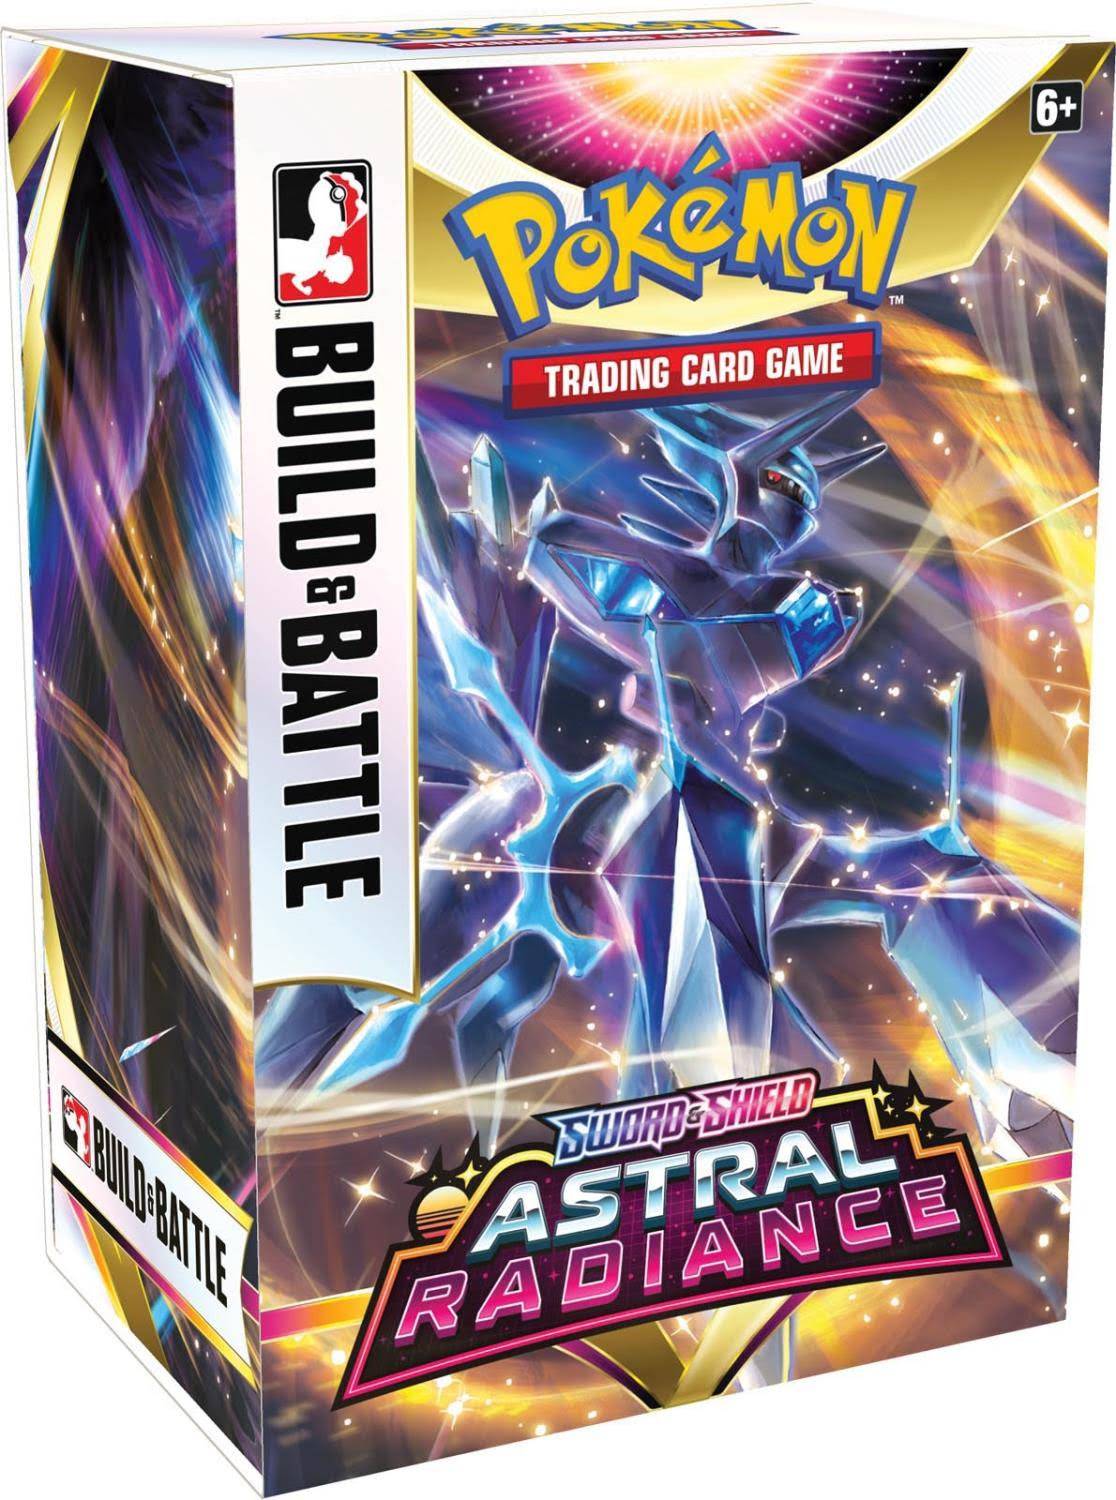 Pokemon TCG Sword and Shield 10 - Astral Radiance Build & Battle Box